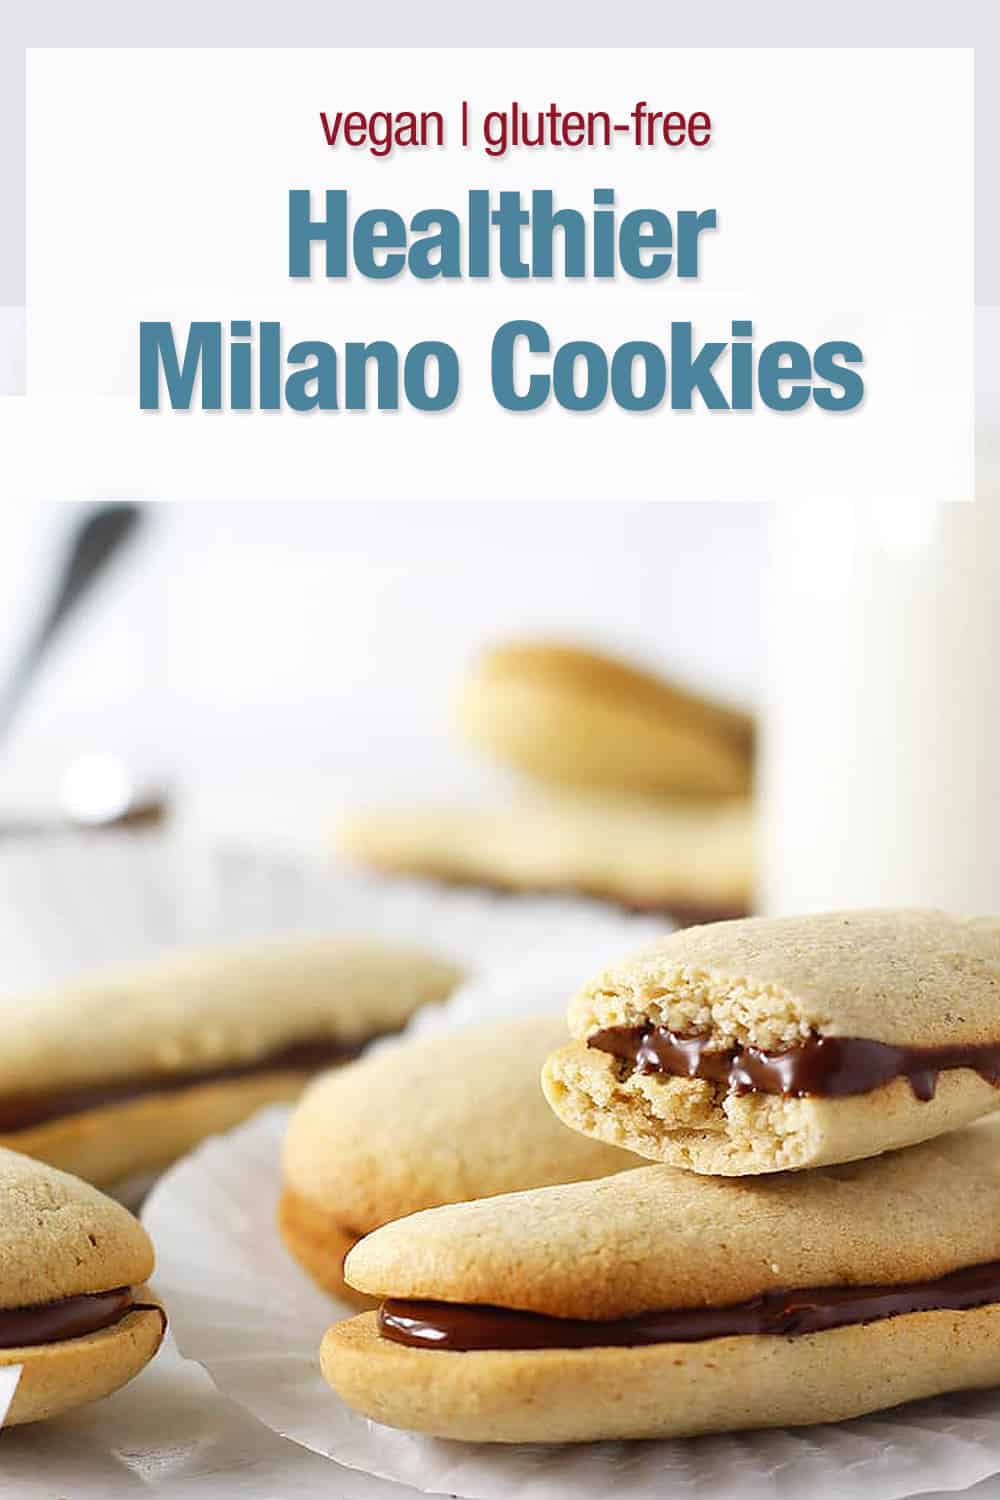 milano cookies stacked and one with a bit